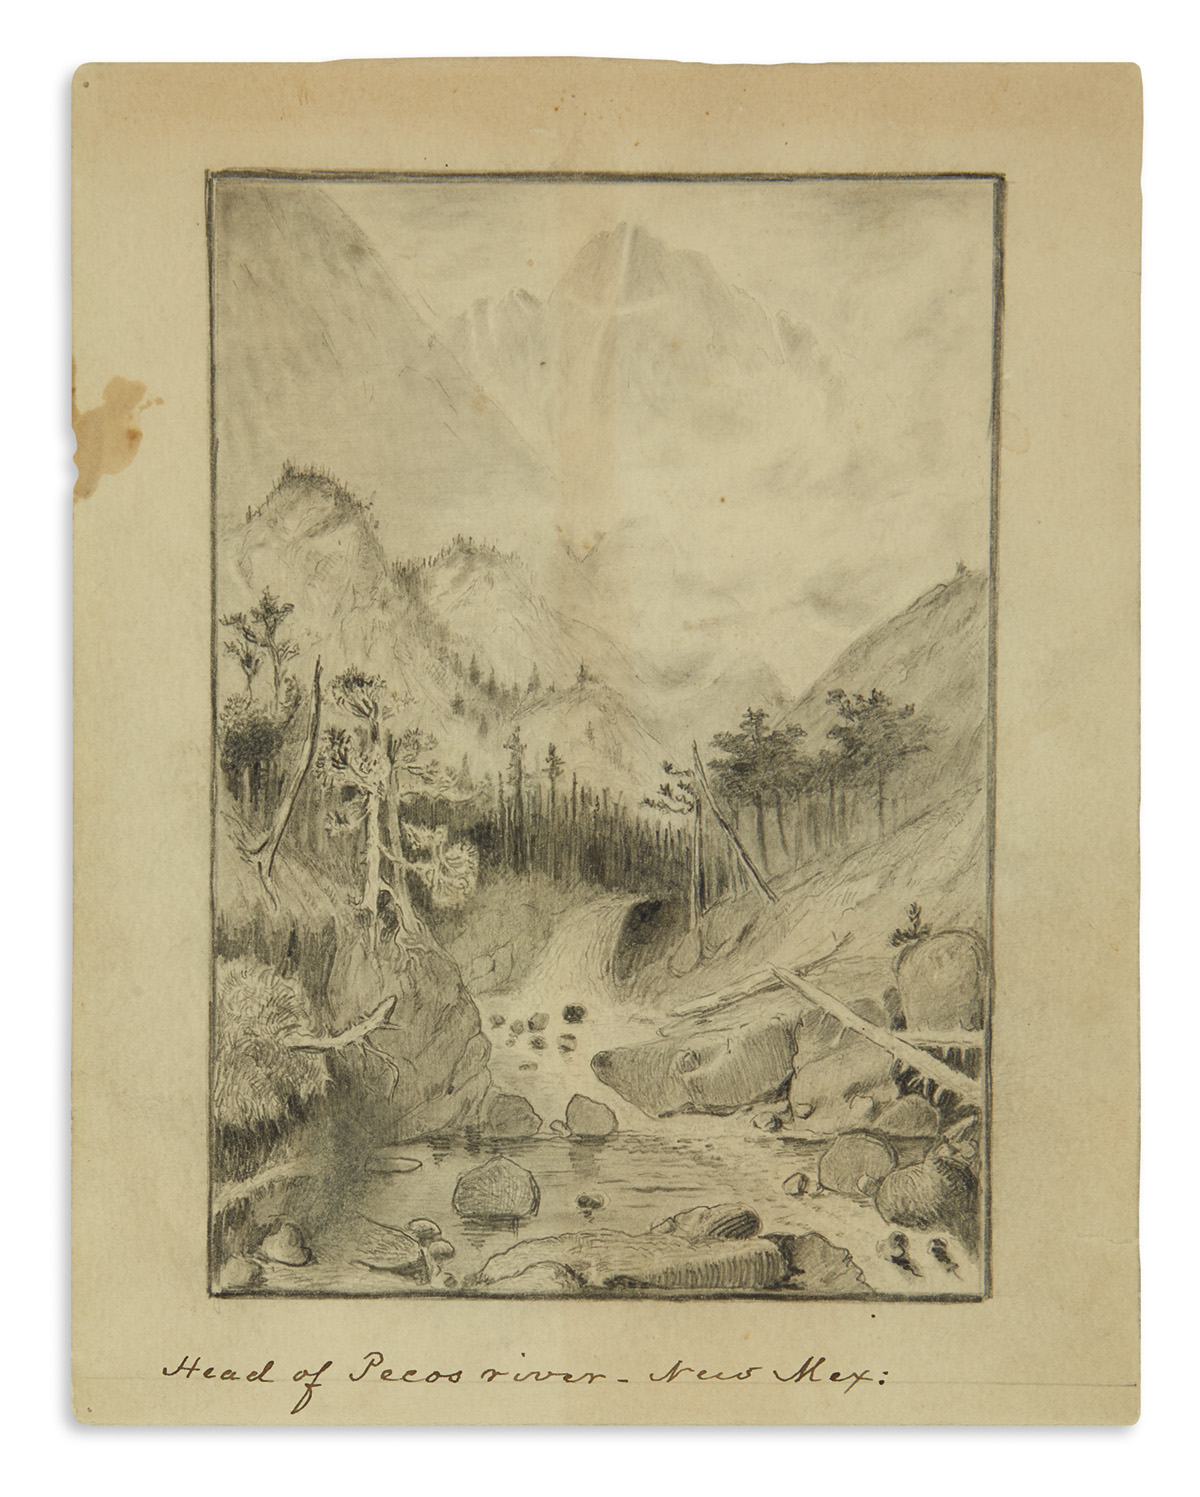 (WEST.) Porter, William Sydney, a.k.a. O. Henry. Drawings made to illustrate a lost mining memoir, long before his fame as an author.